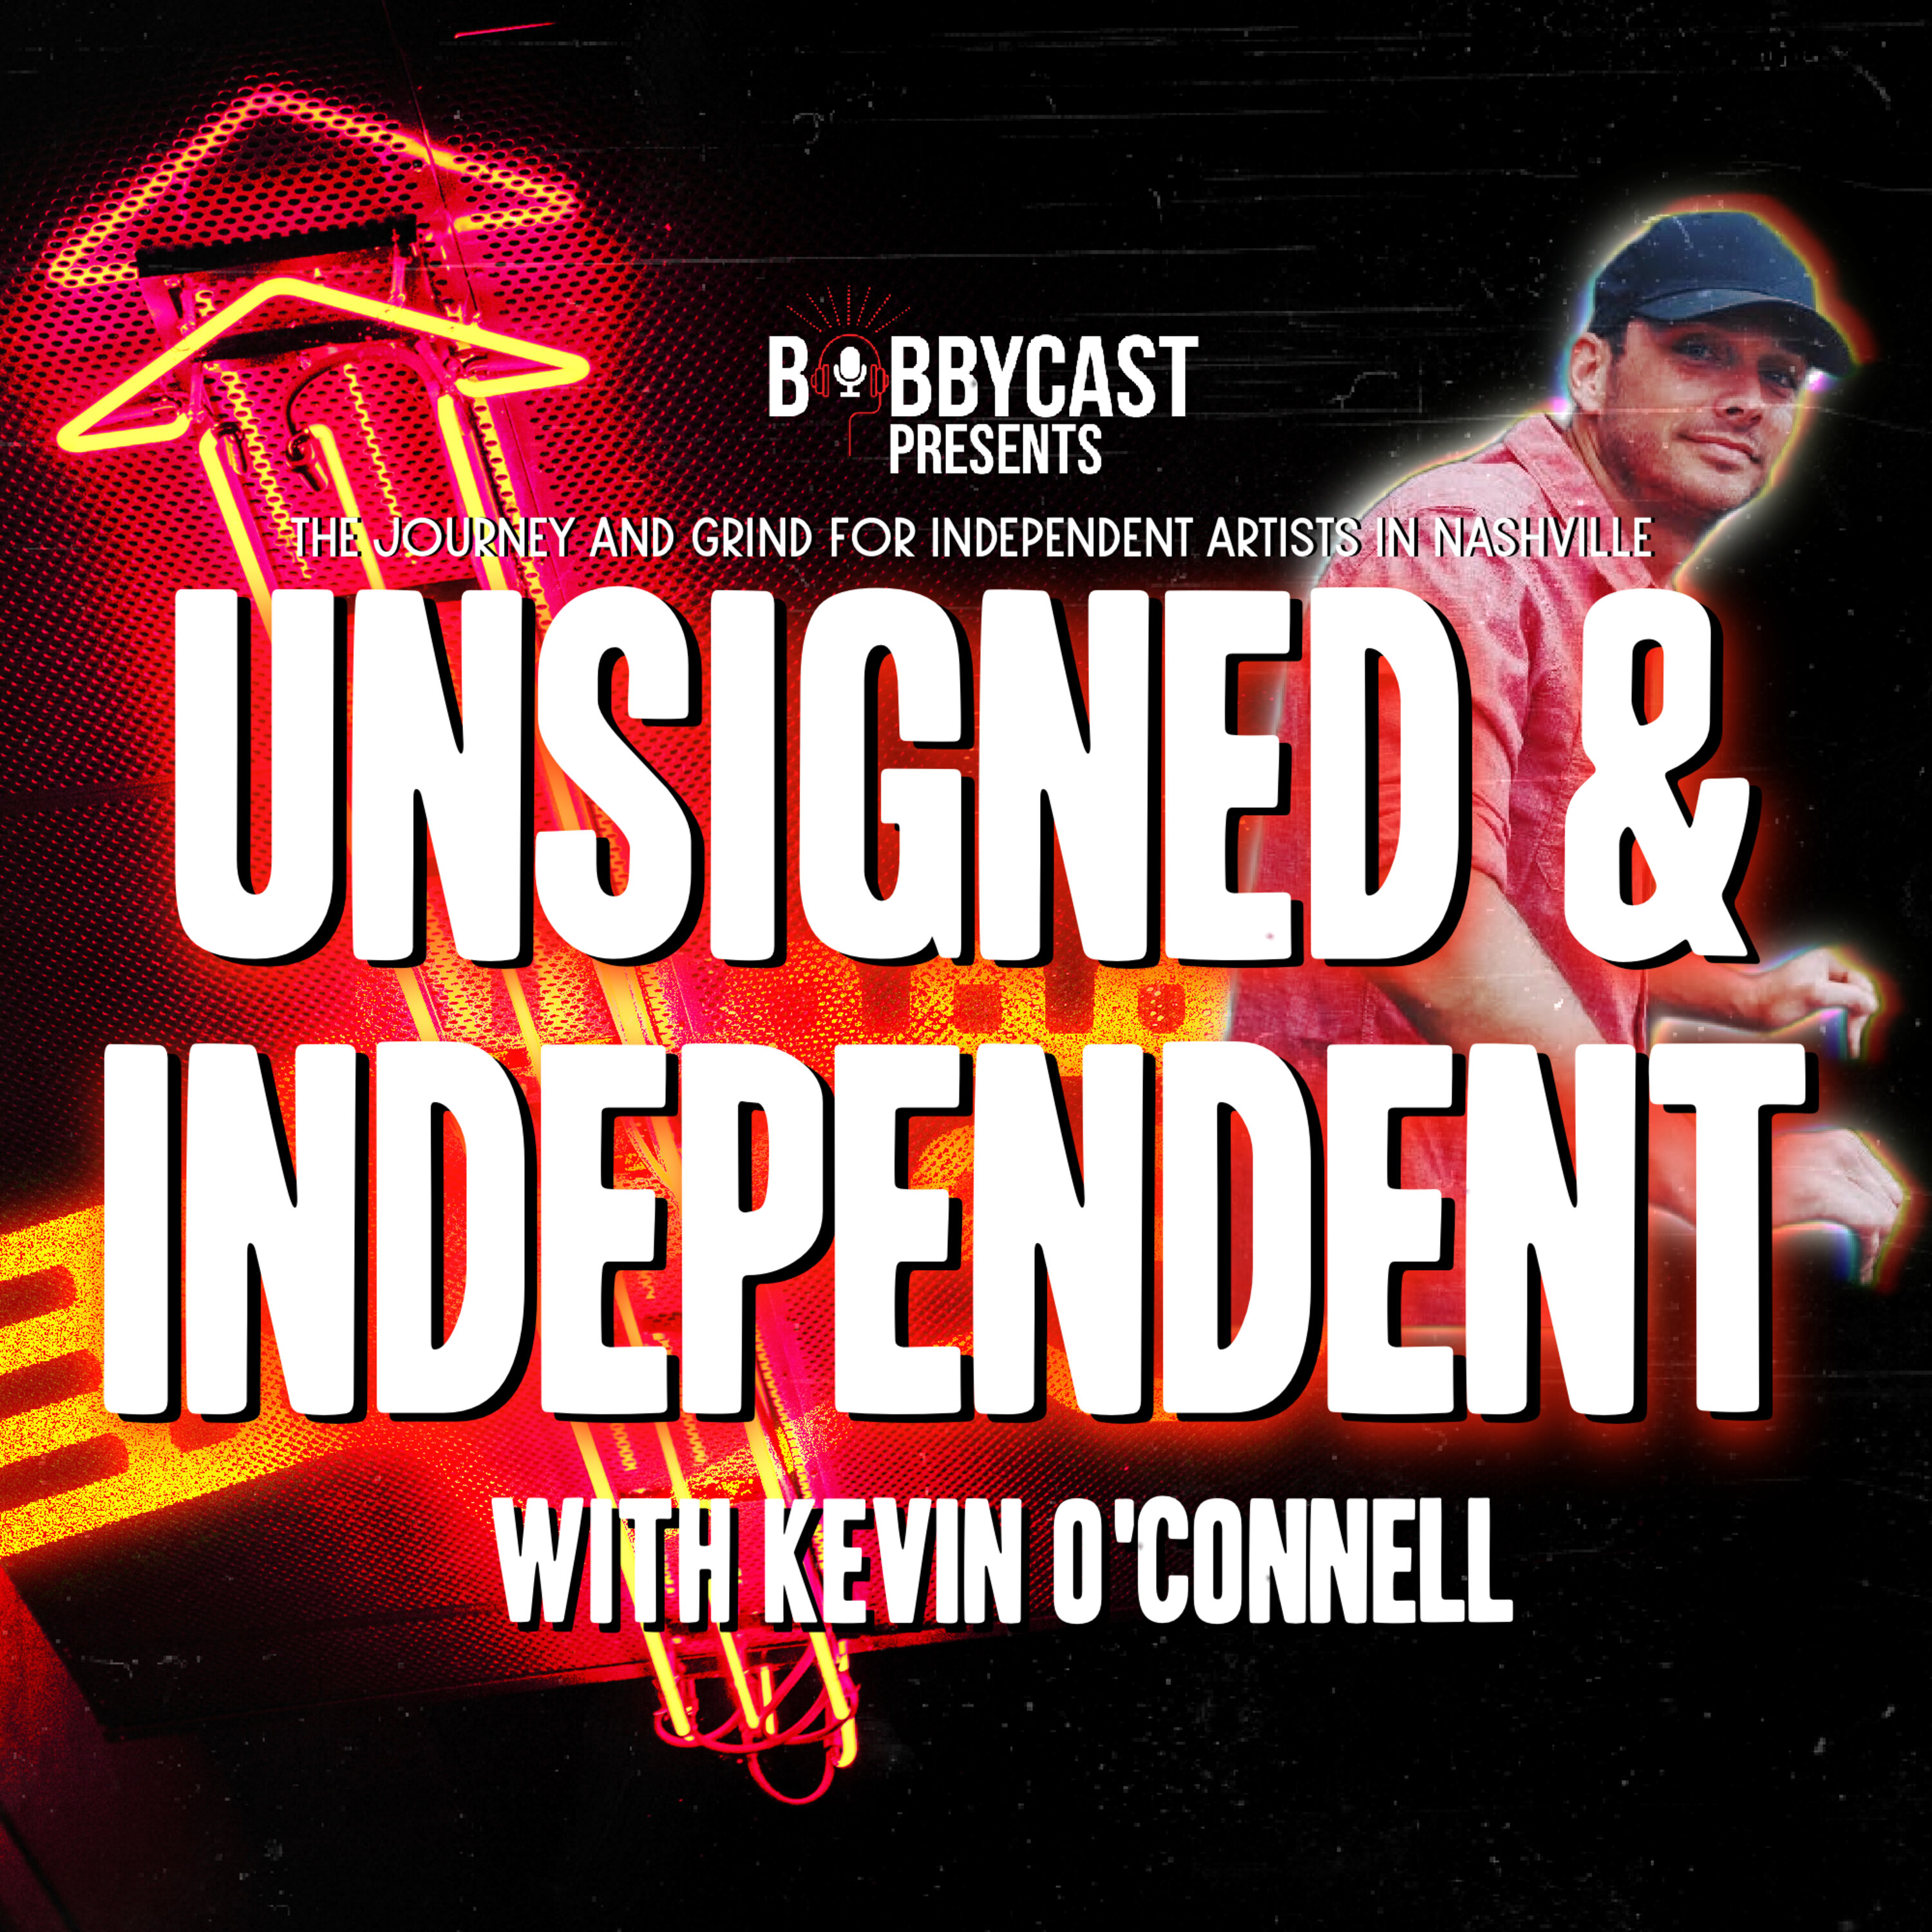 BobbyCast Presents: Unsigned & Independent: Graham Nancarrow on Staying True to His Roots